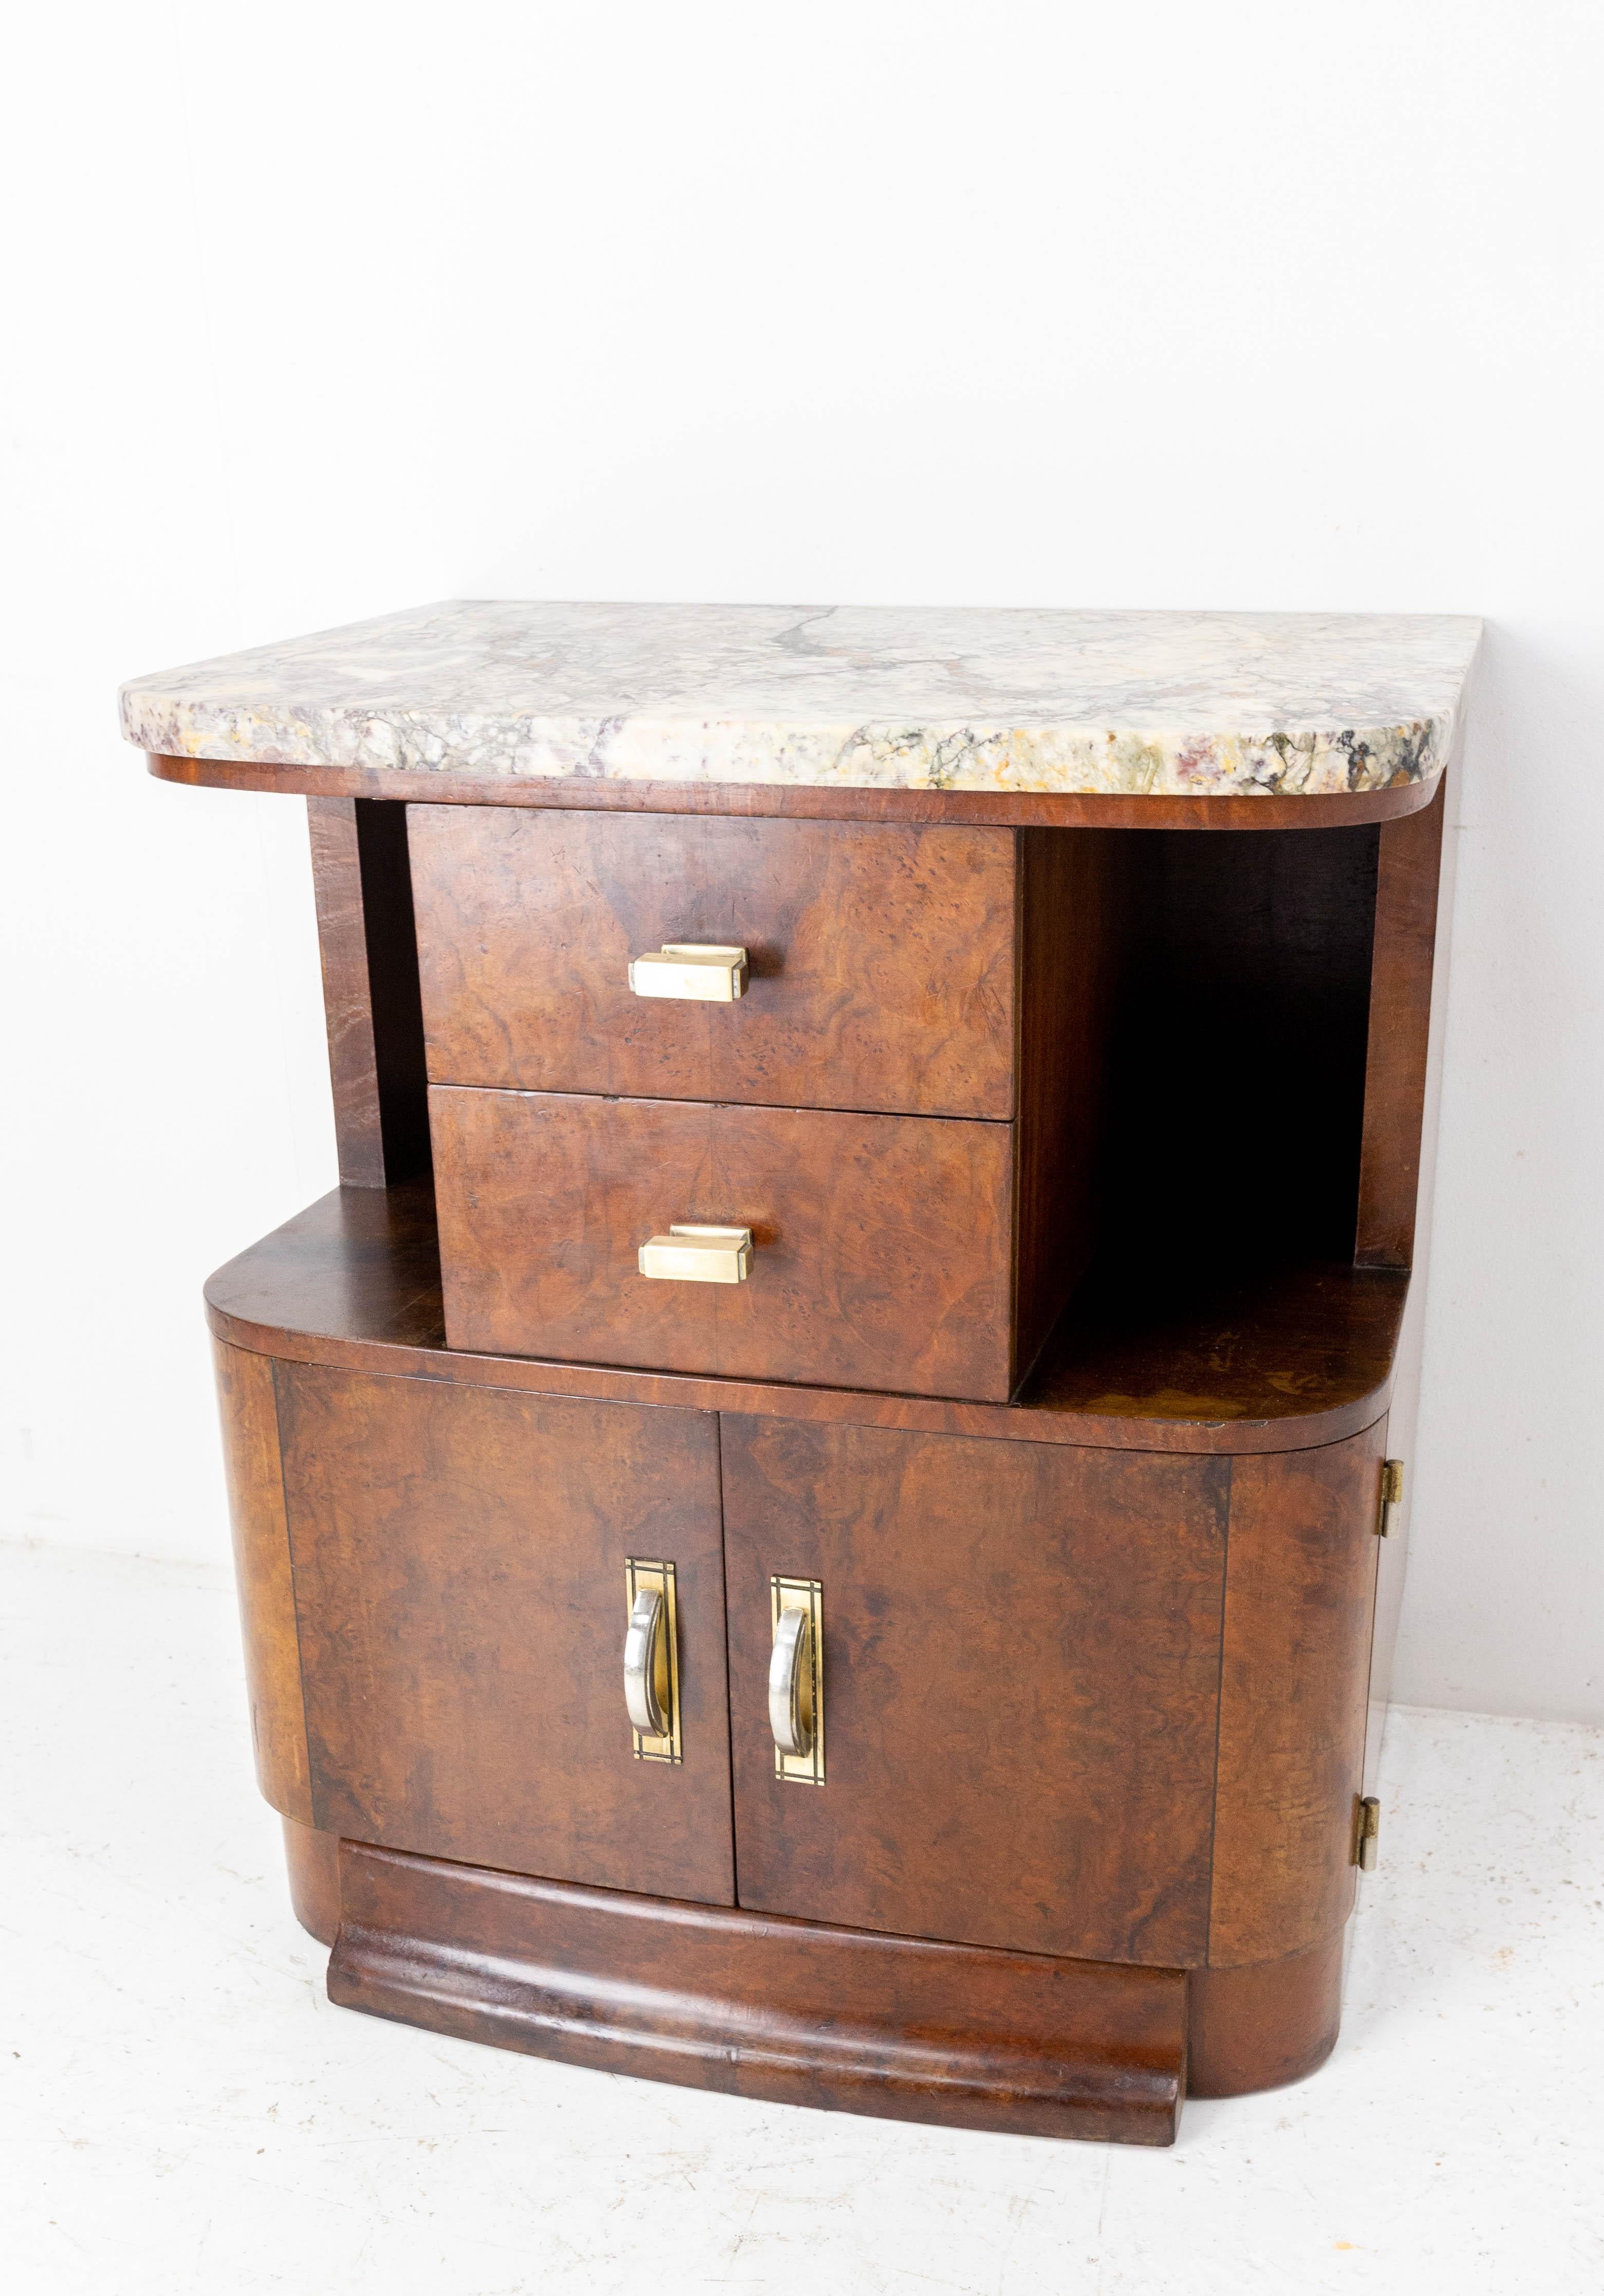 Art Deco side or end table, or bed side table,
Burled Walnut and marble
Two drawers, two doors and two open parts
French 1930
Good condition

Shipping:
L56 P42,5 H62 30kg.
 